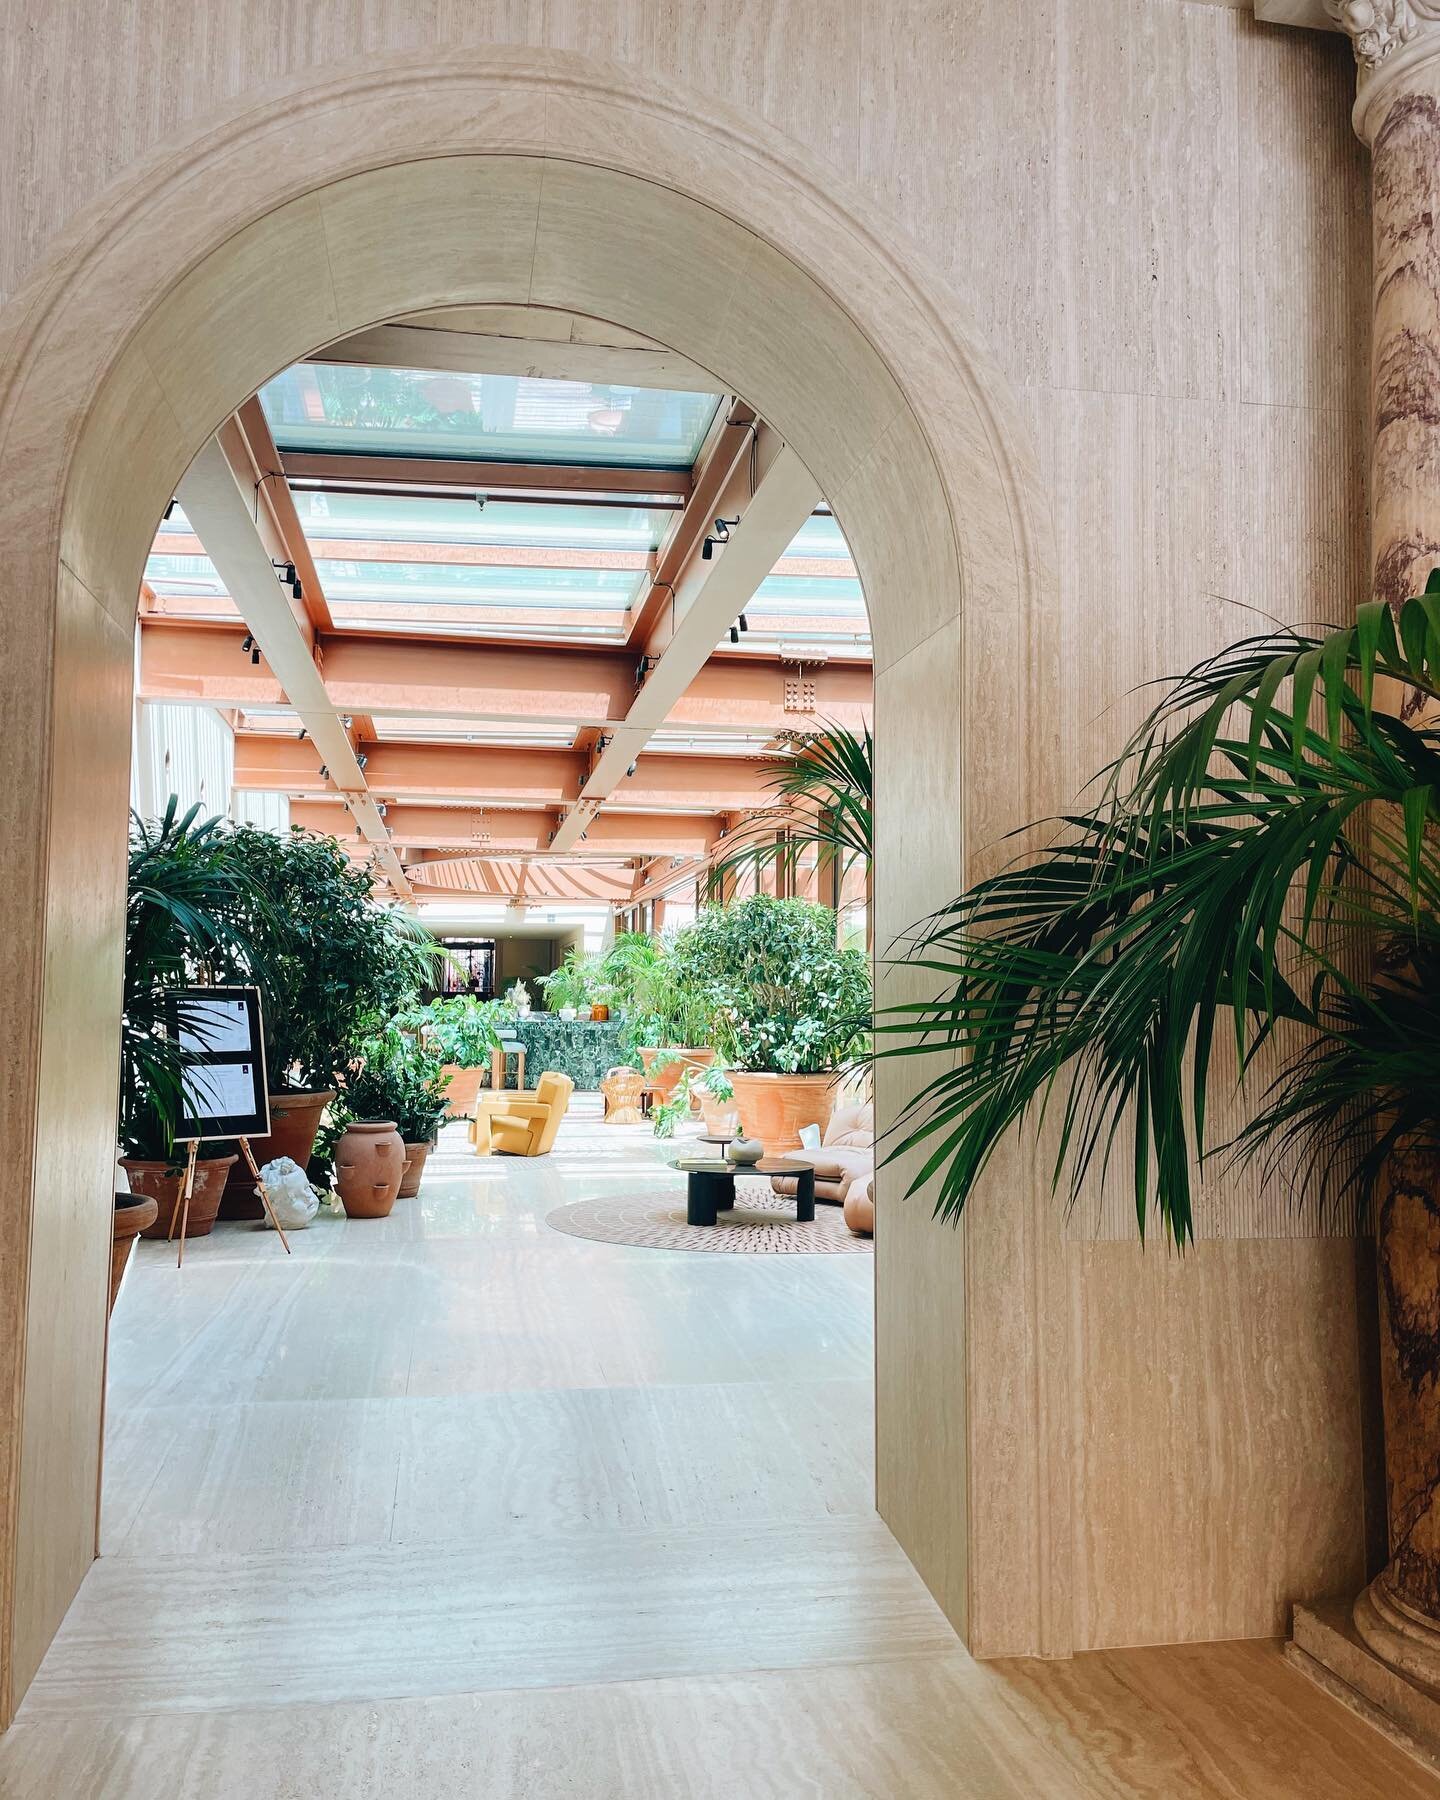 Next stop in Rome is another new property from one of our favorite brands - Six Senses!  The first city property for the brand definitely did not disappoint.  Located right in the heart of Via del Corso, you are only steps away from so many shops &am